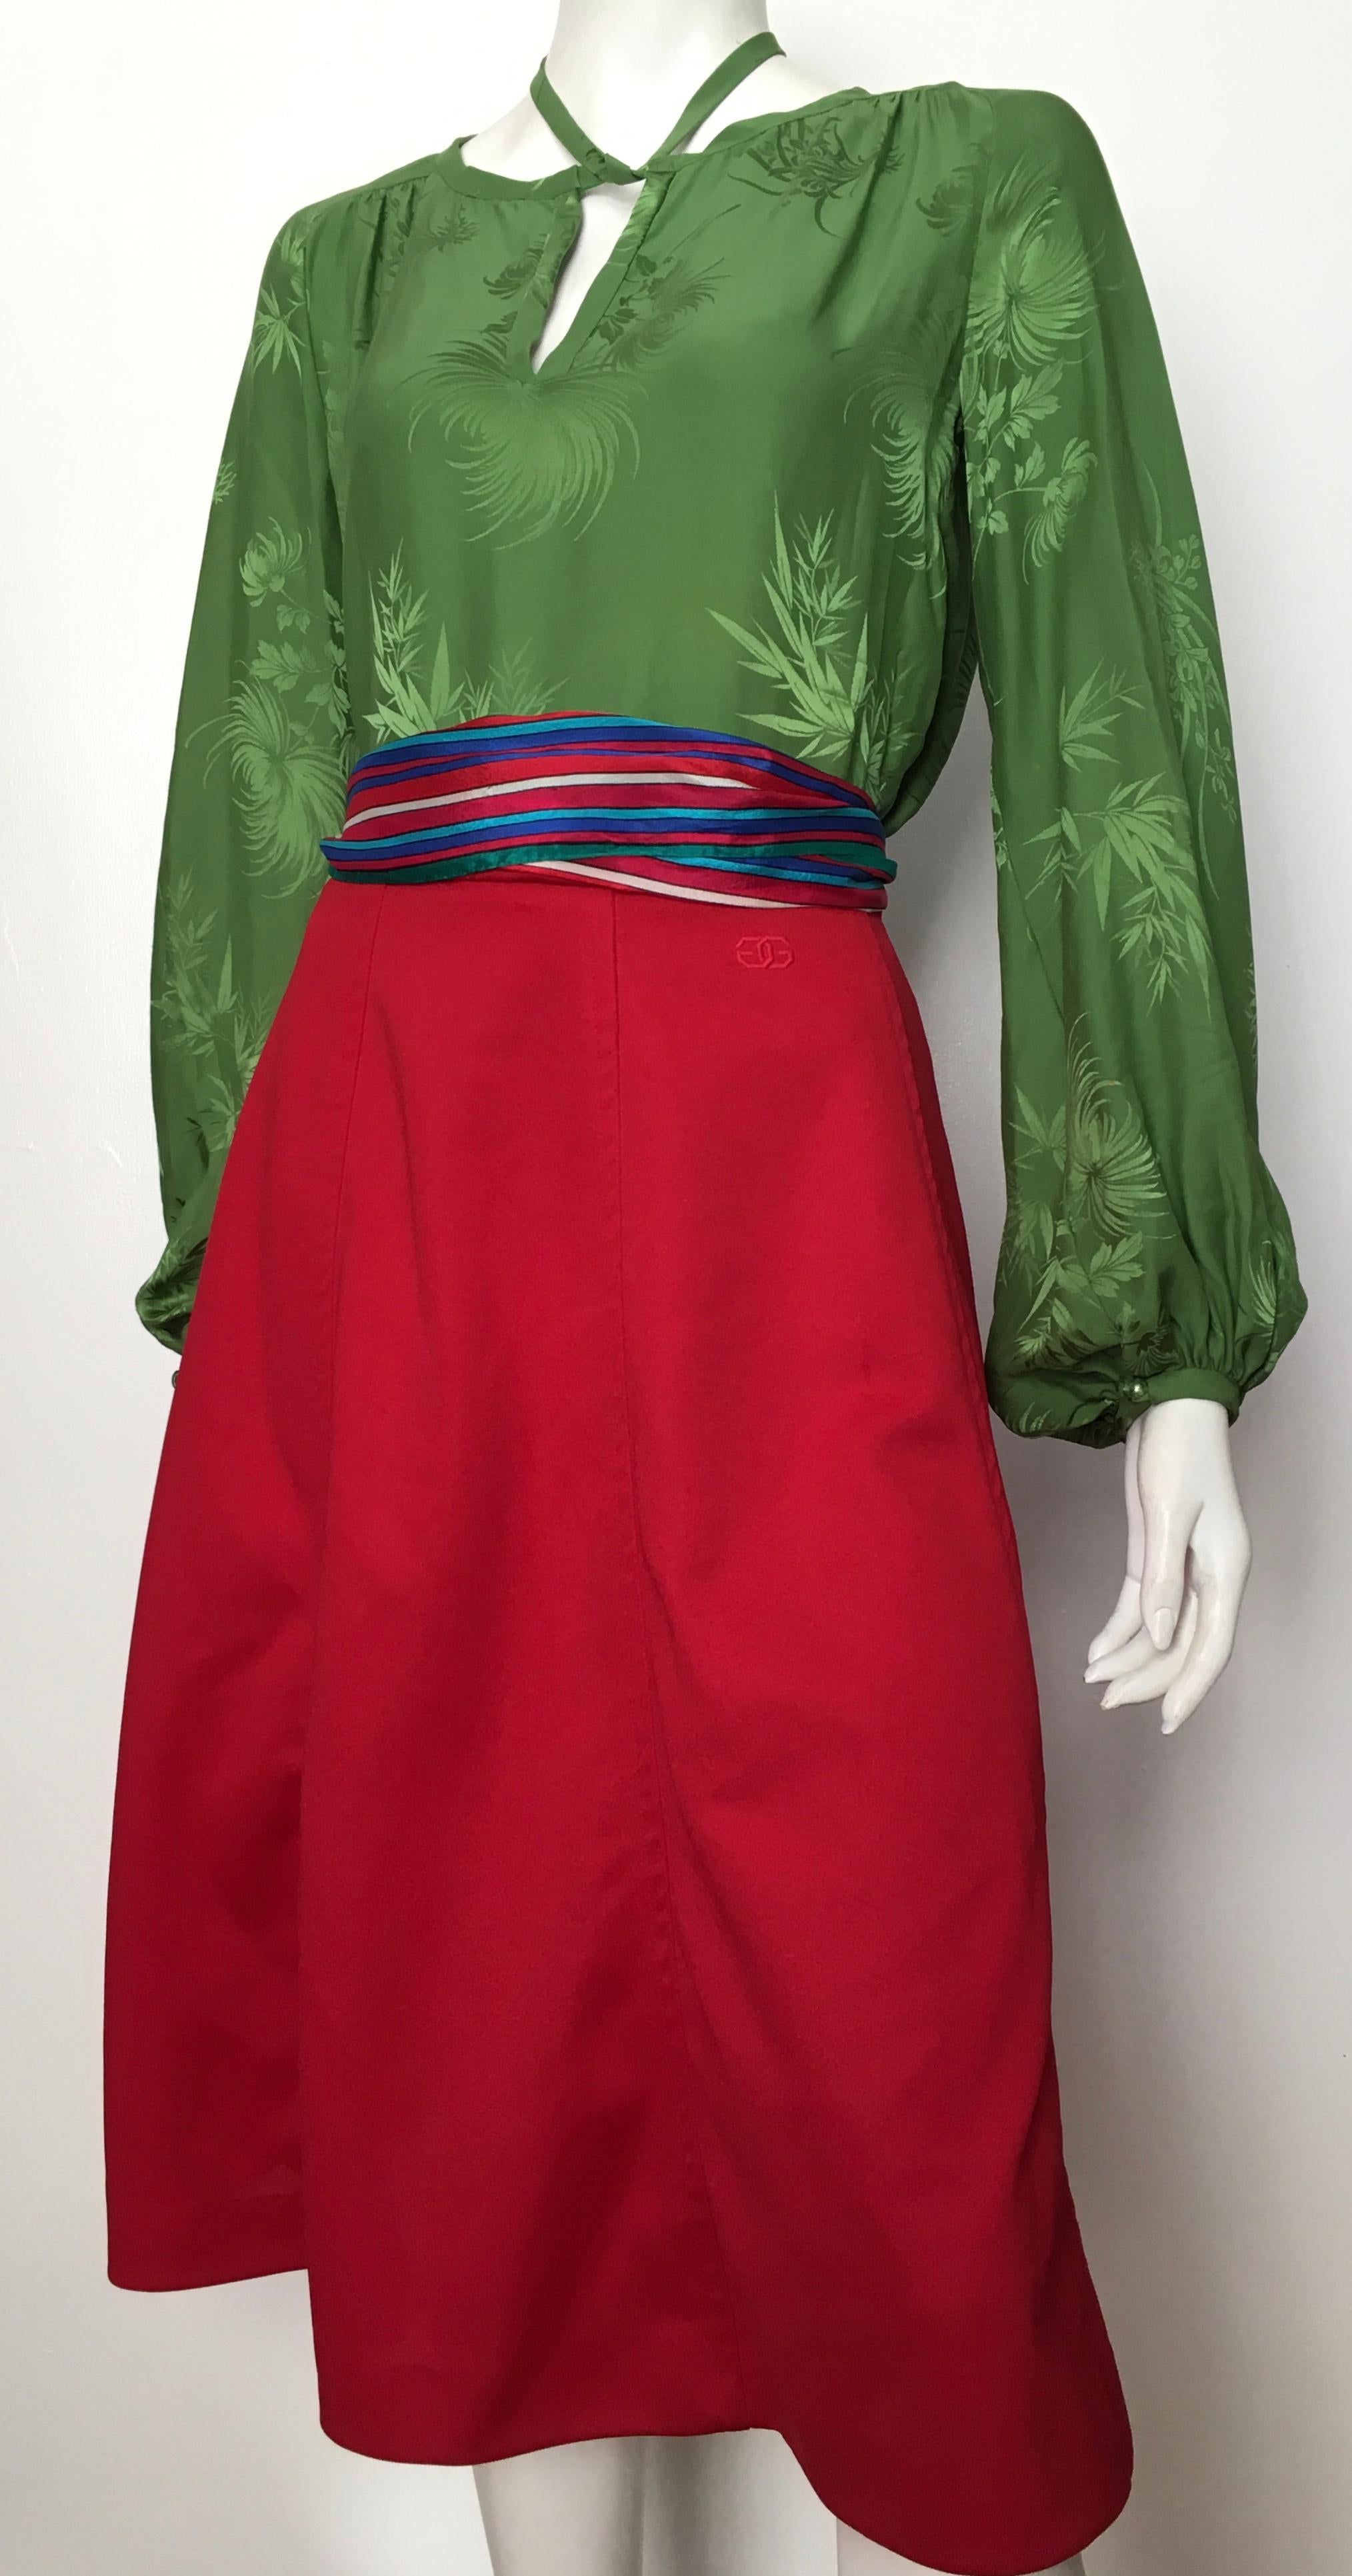 Malcolm Starr 1970s Green Silk Long Sleeve Blouse Size 6/8. For Sale 9